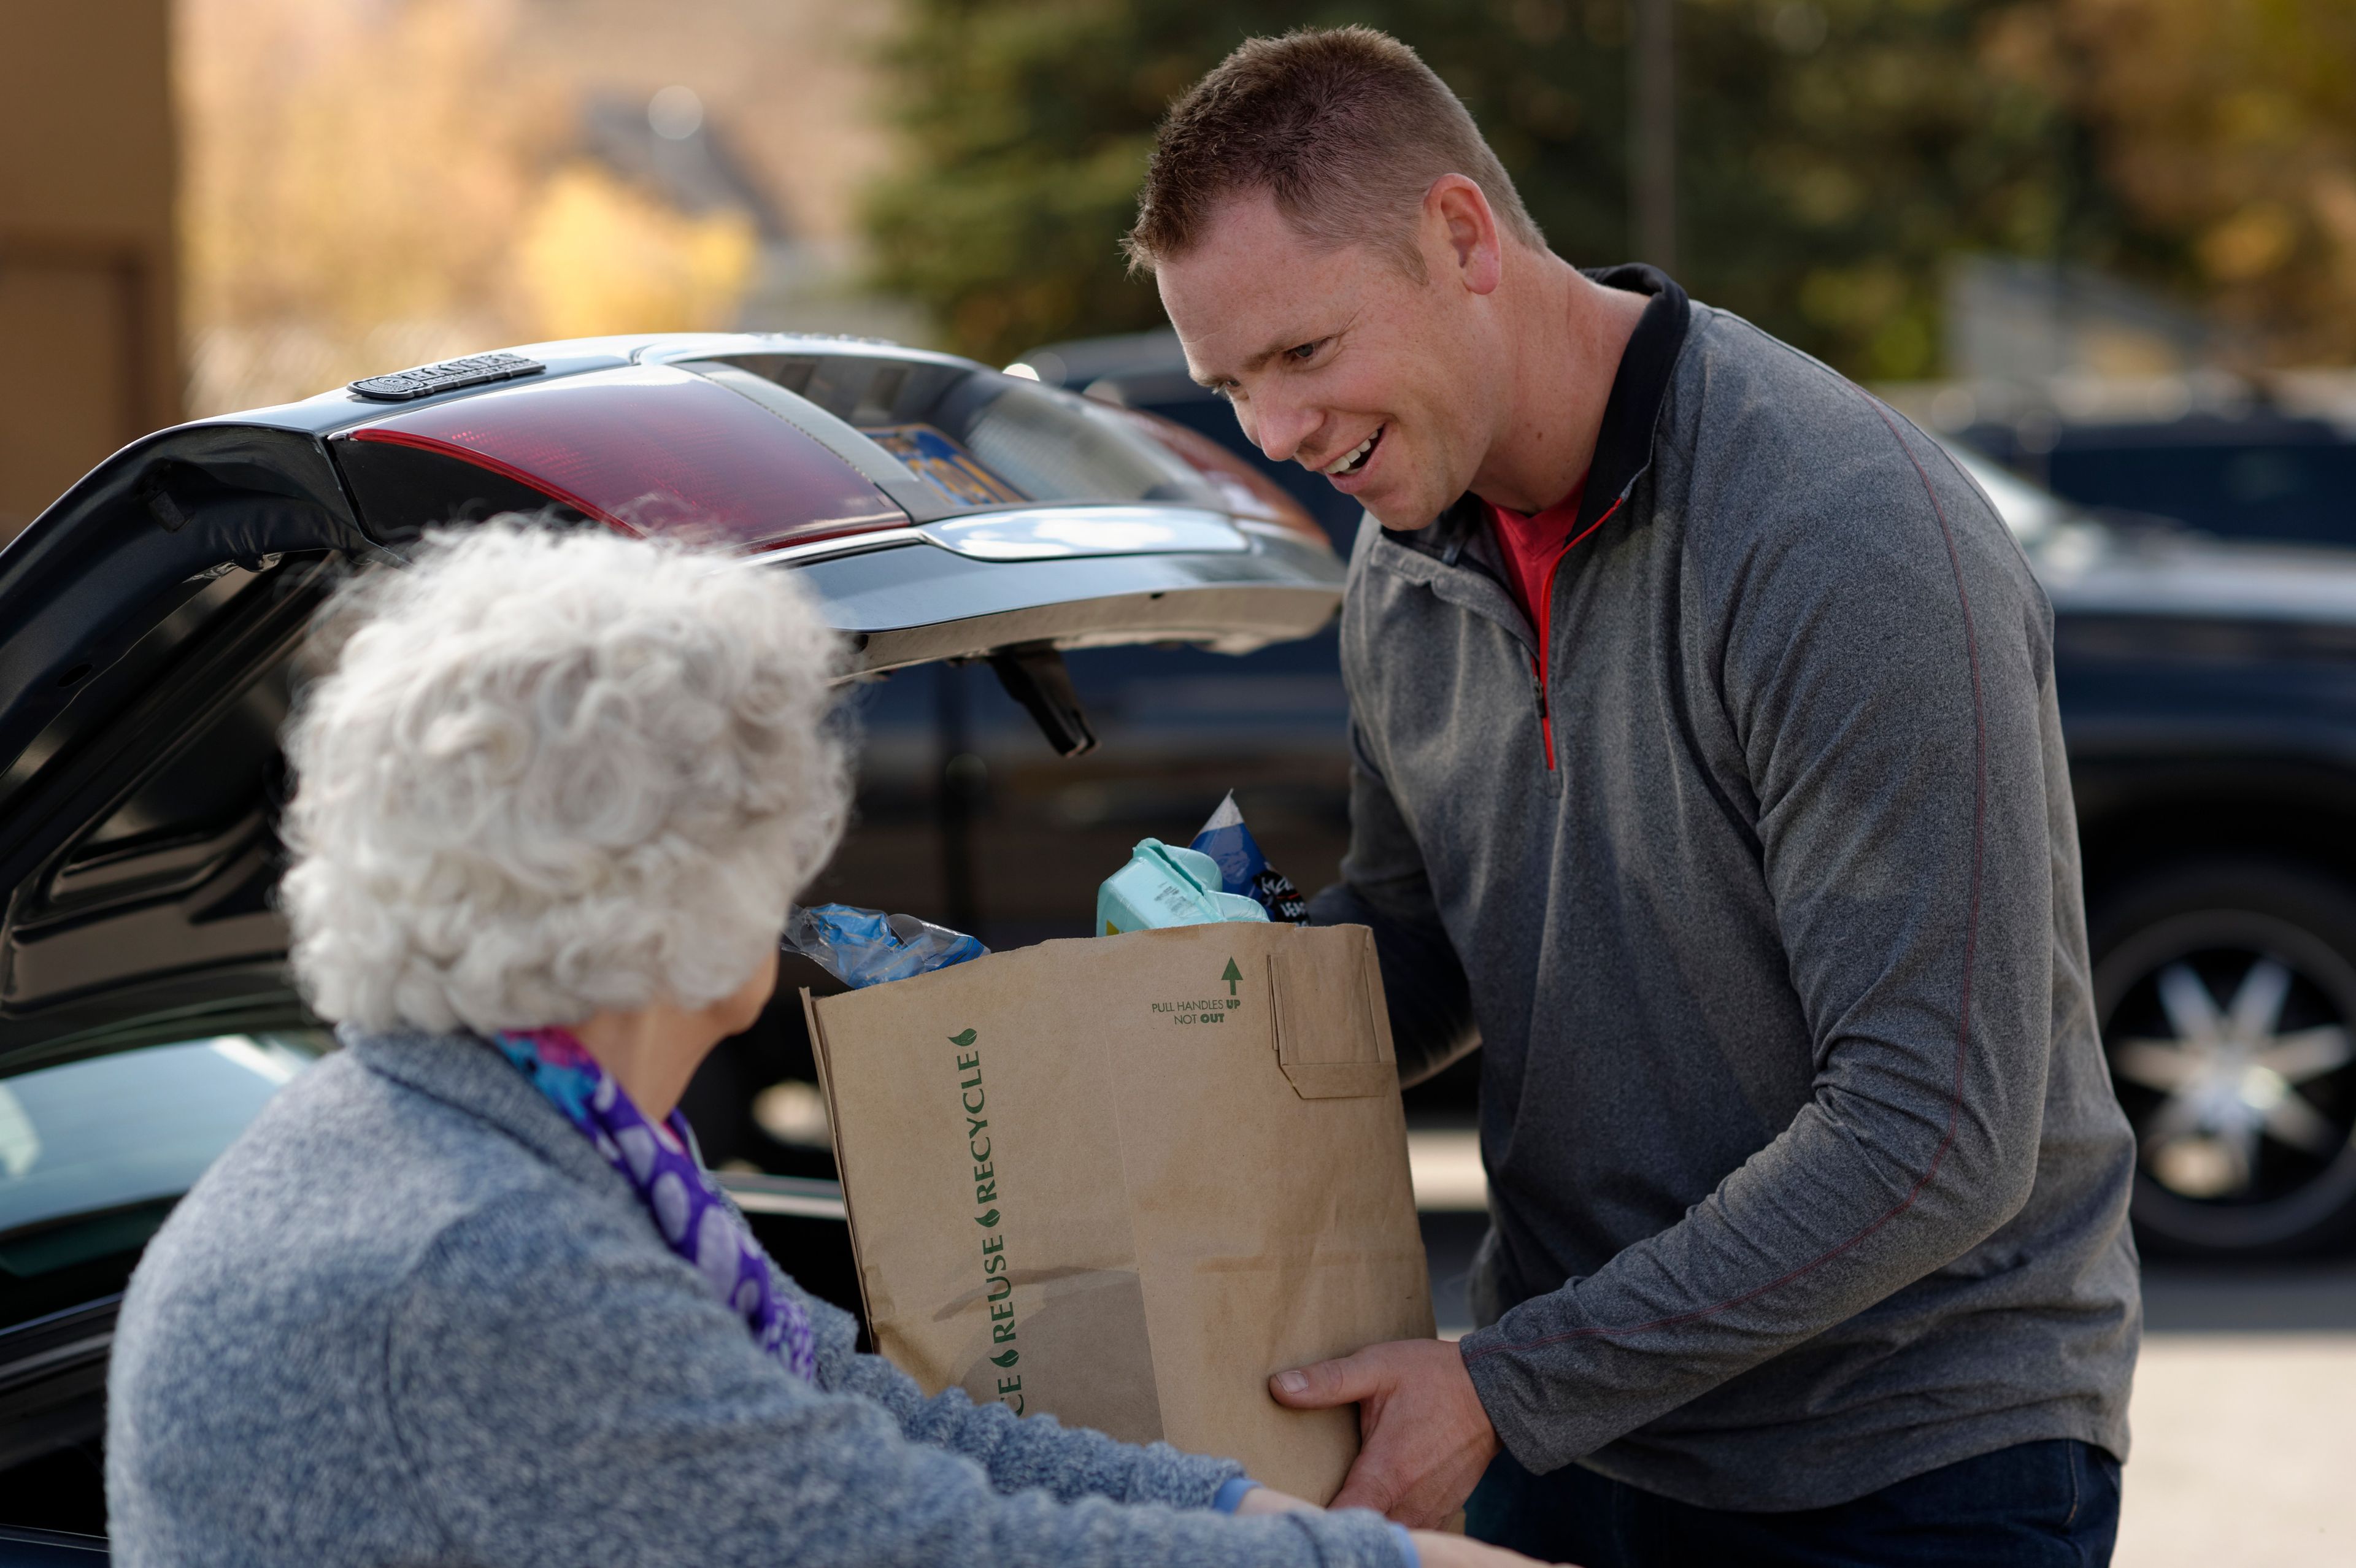 A man helping an elderly woman with her groceries in a parking lot.